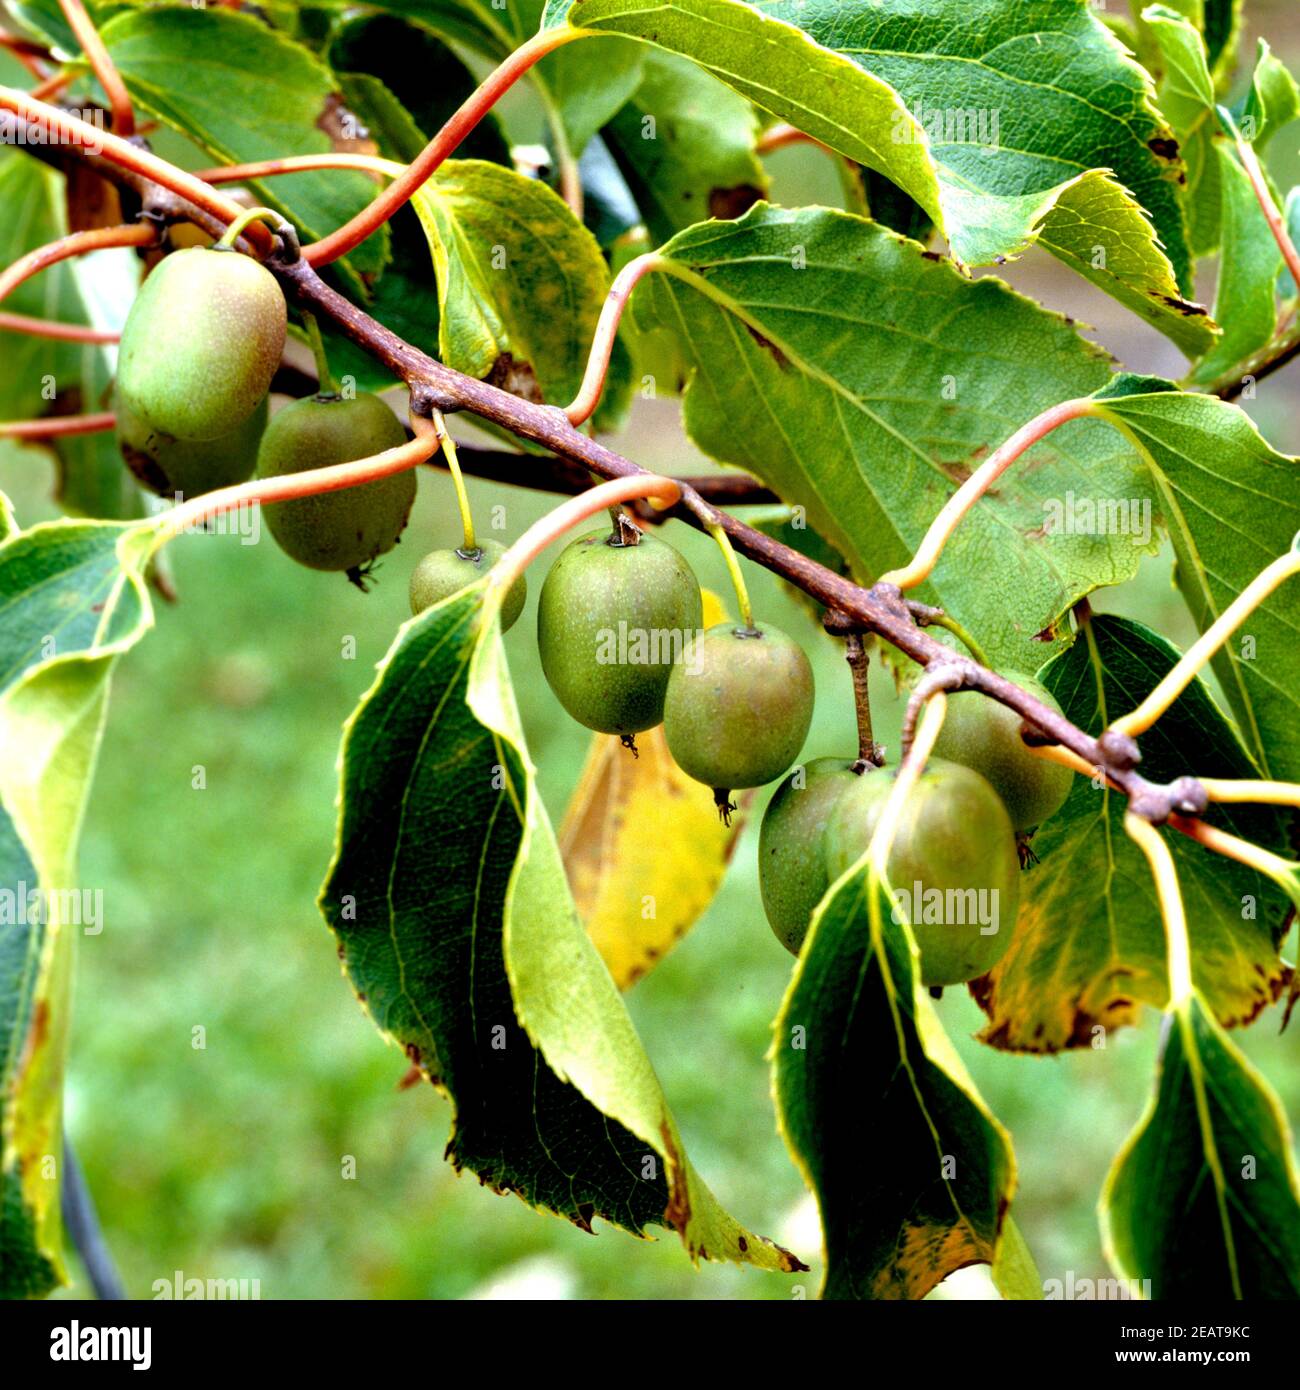 Kiwi Pflanzen High Resolution Stock Photography and Images - Alamy